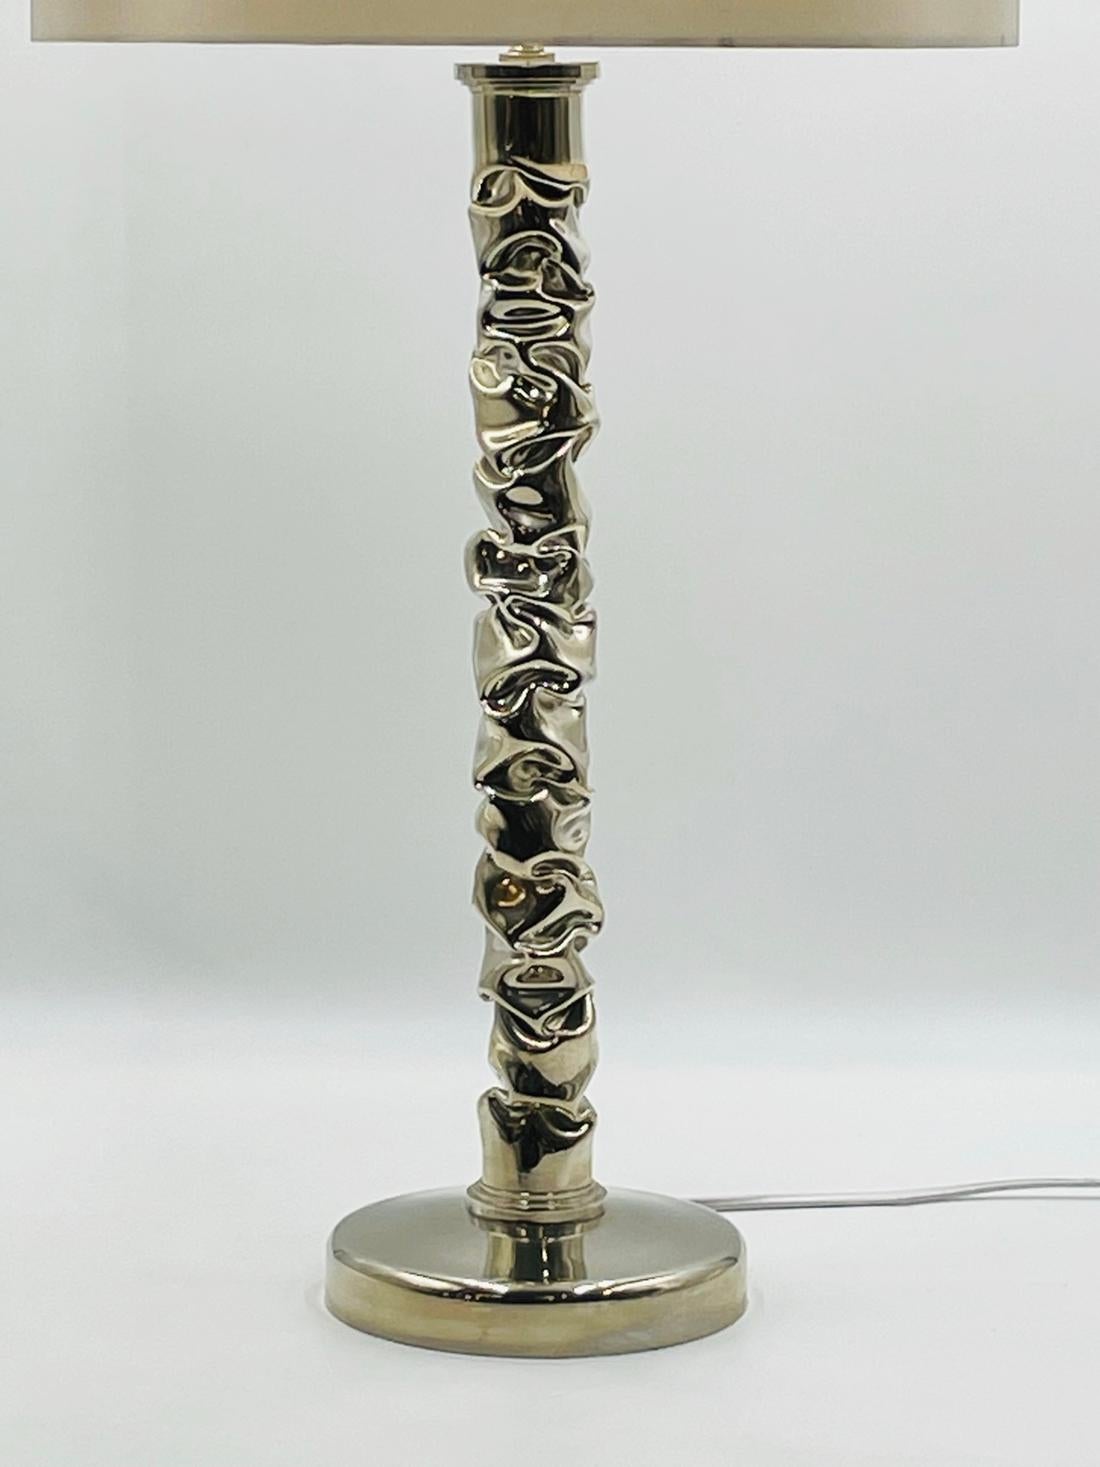 Modern Stunning Table Lamp in Polished Nickel, Made in England by Porta Romana For Sale